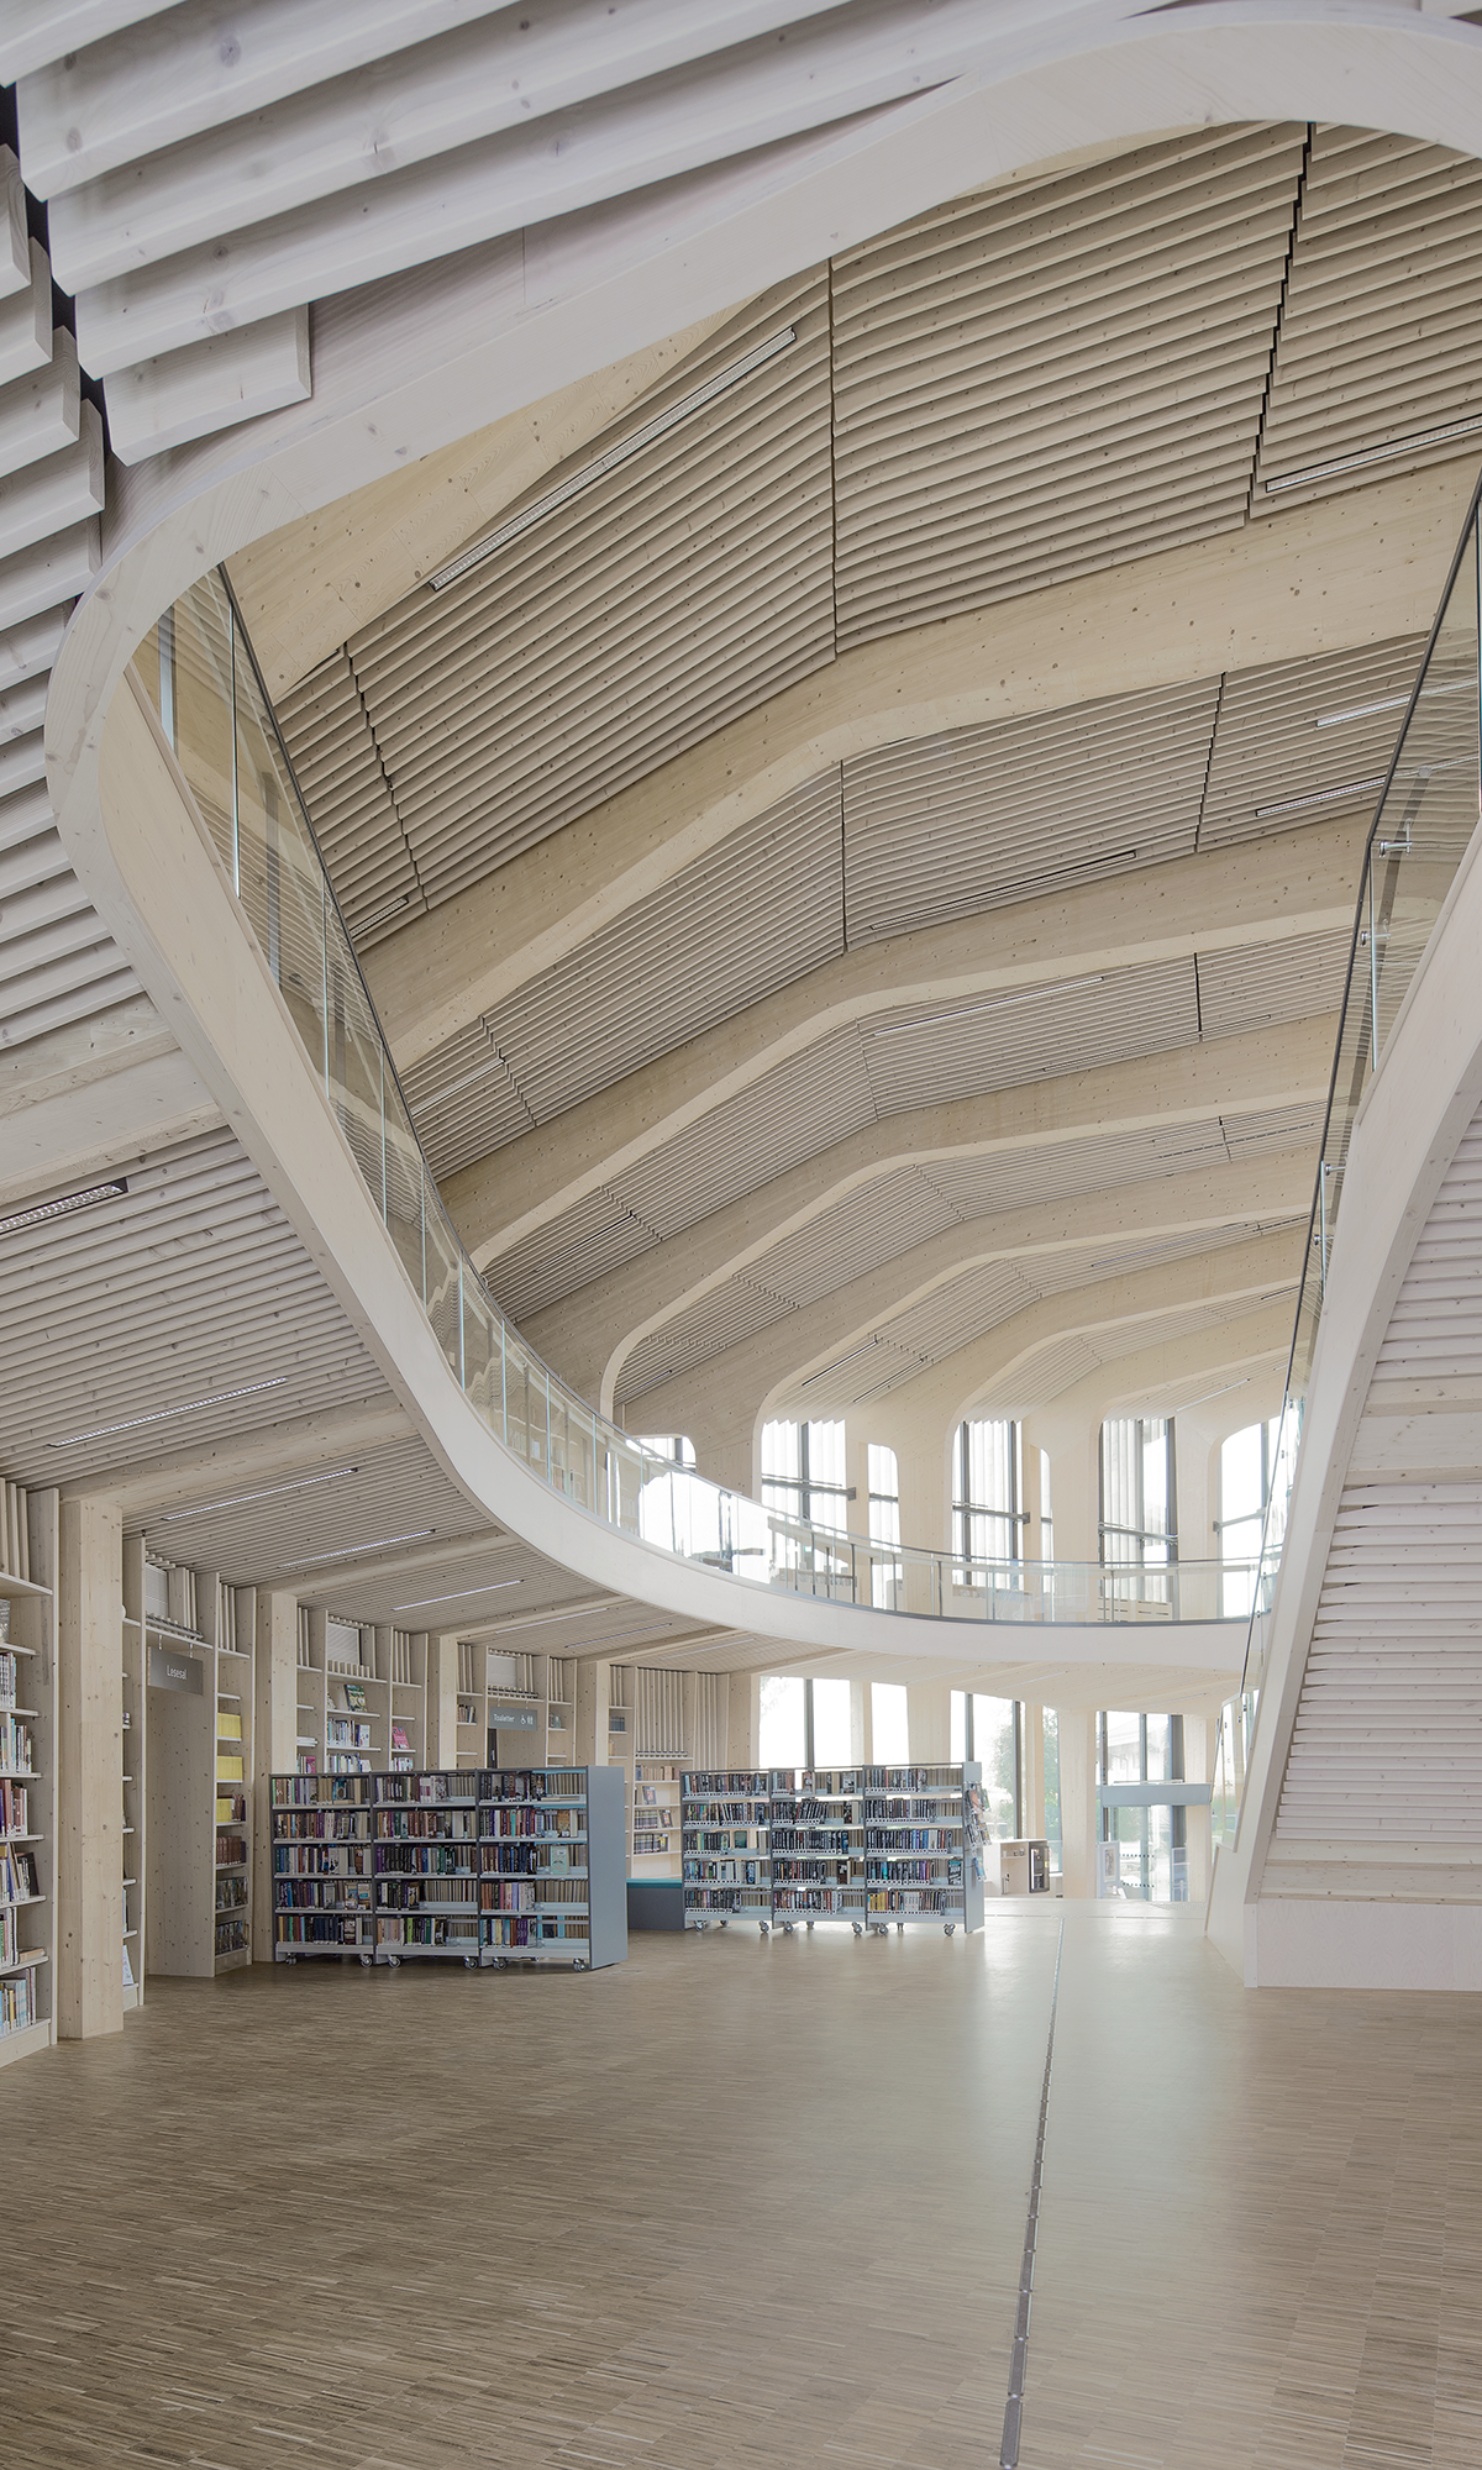 View from the ground floor with bookshelves up to the roof in the library building with its striking timber construction.